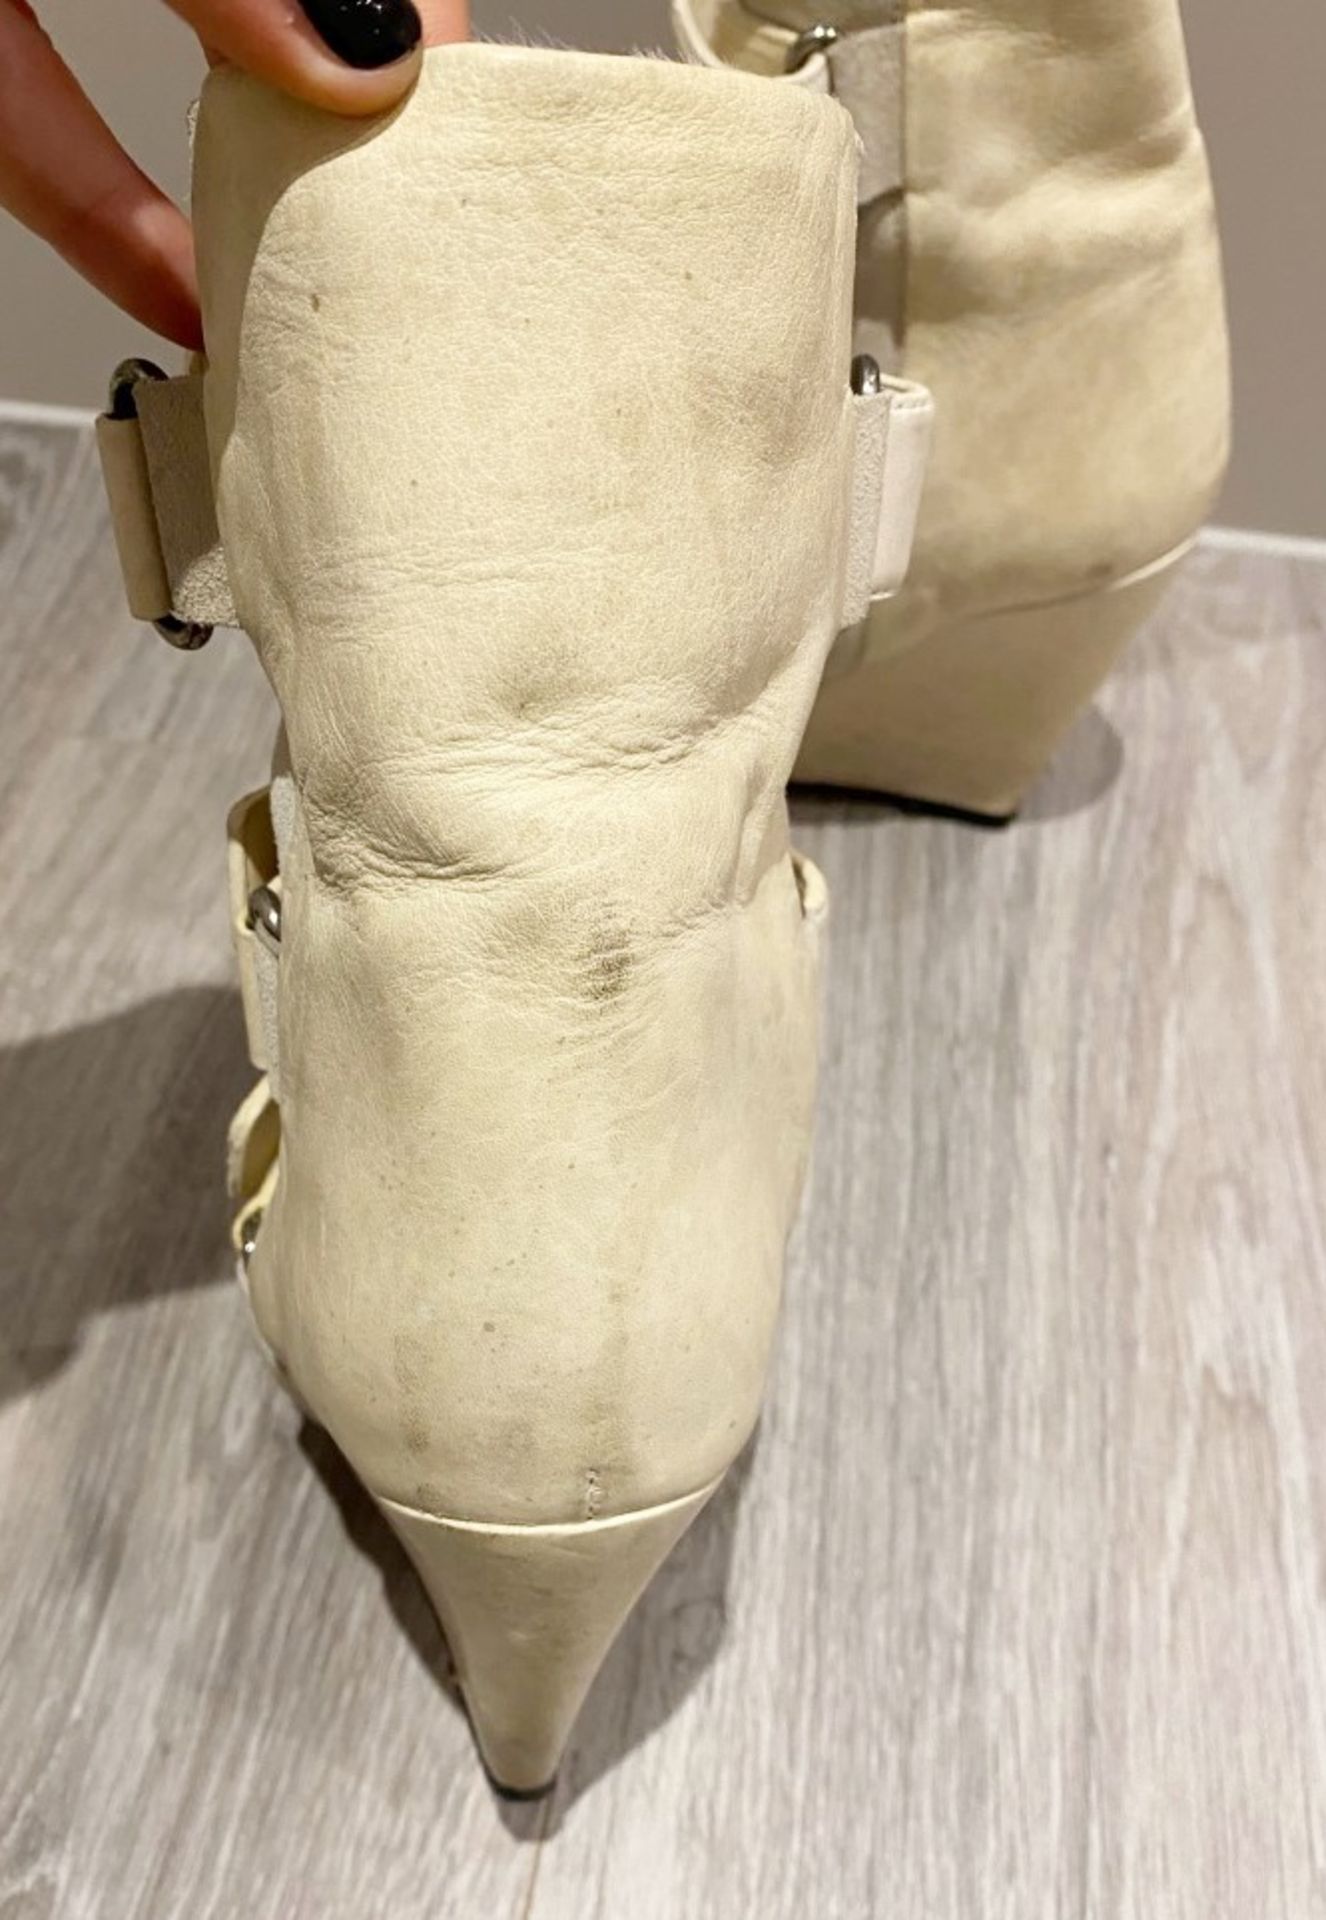 1 x Pair Of Genuine Isabel Marant Boots In Crème And Fur - Size: 37 - Preowned in Very Good Conditio - Image 3 of 5